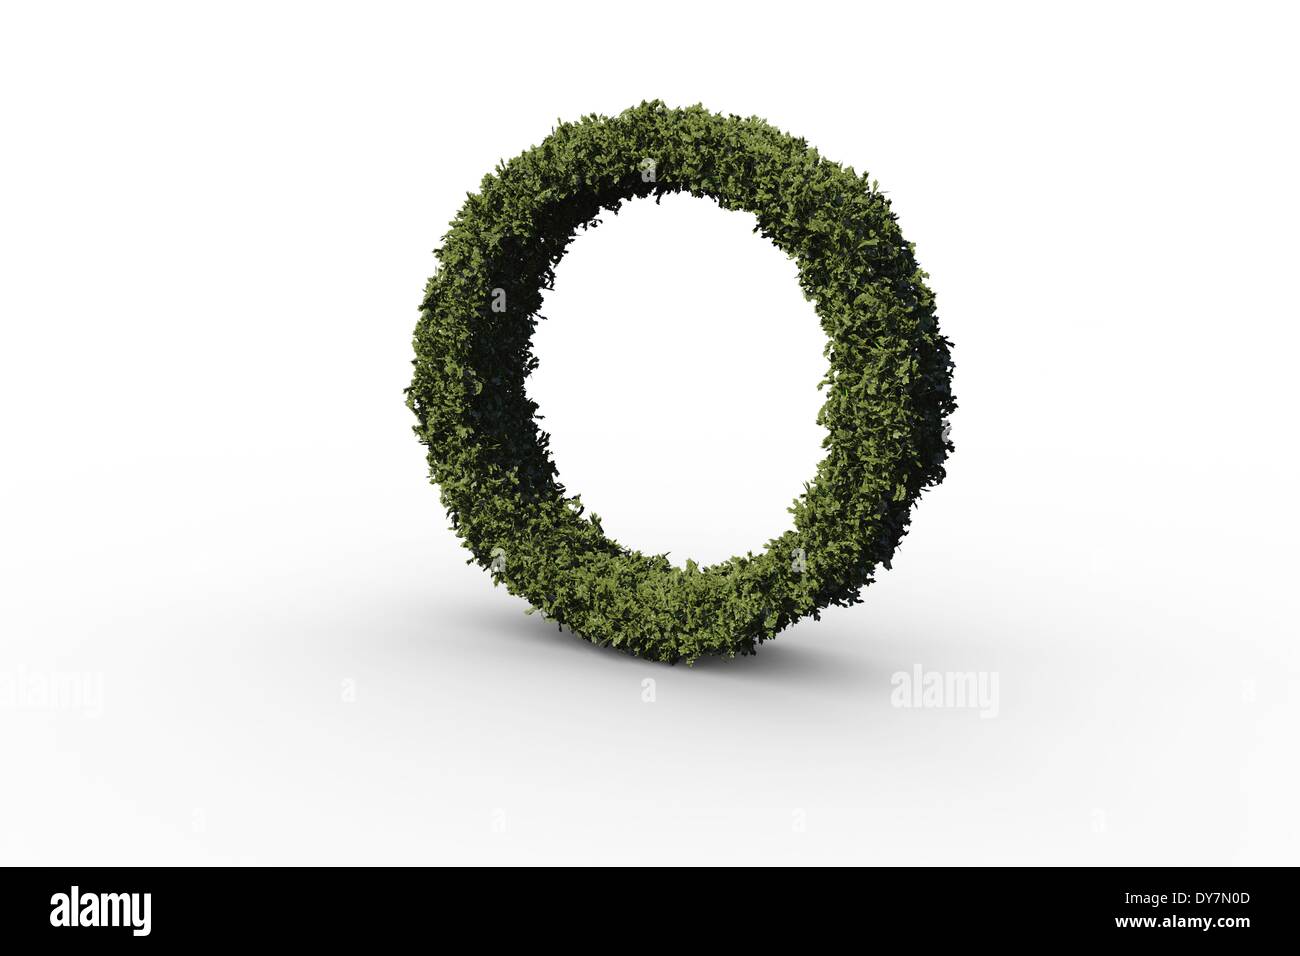 Capital letter o made of leaves Stock Photo